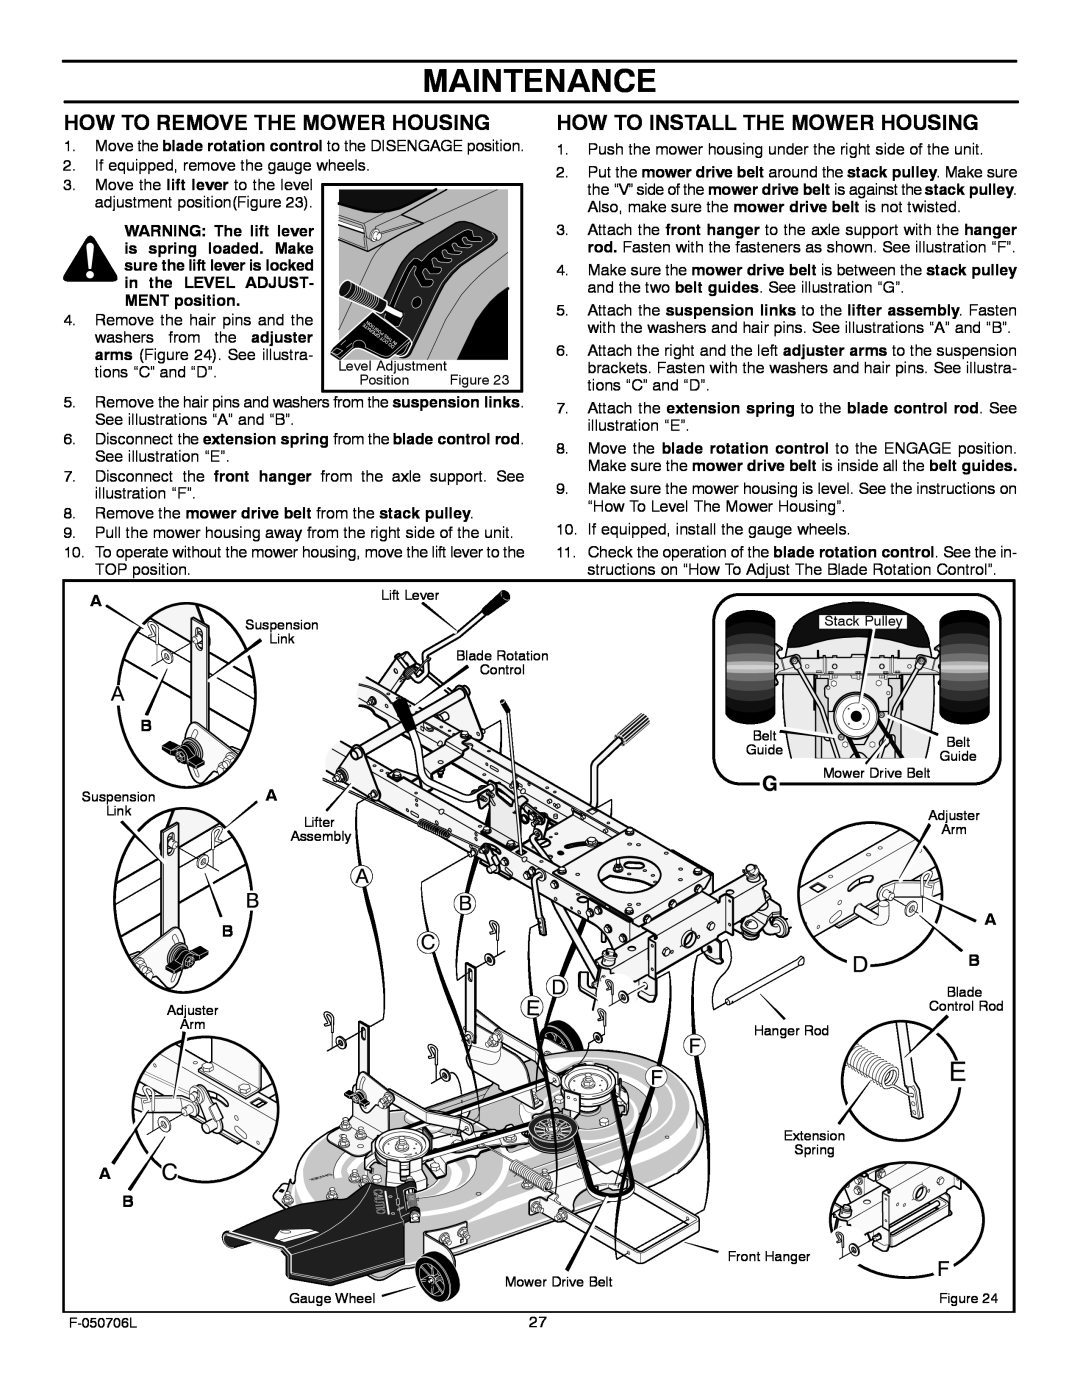 Murray 425014x92B manual Maintenance, How To Remove The Mower Housing, How To Install The Mower Housing 